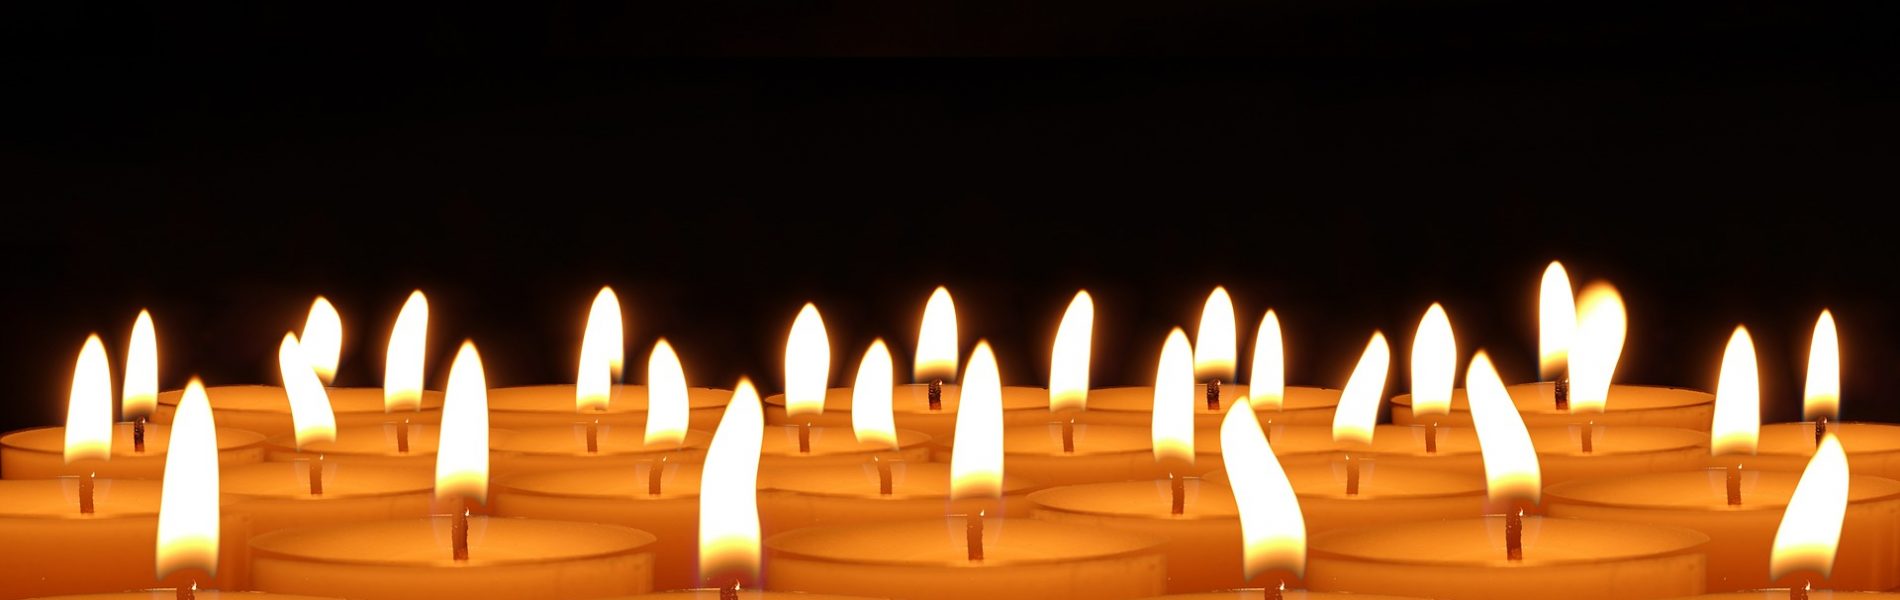 candles-492171_1920